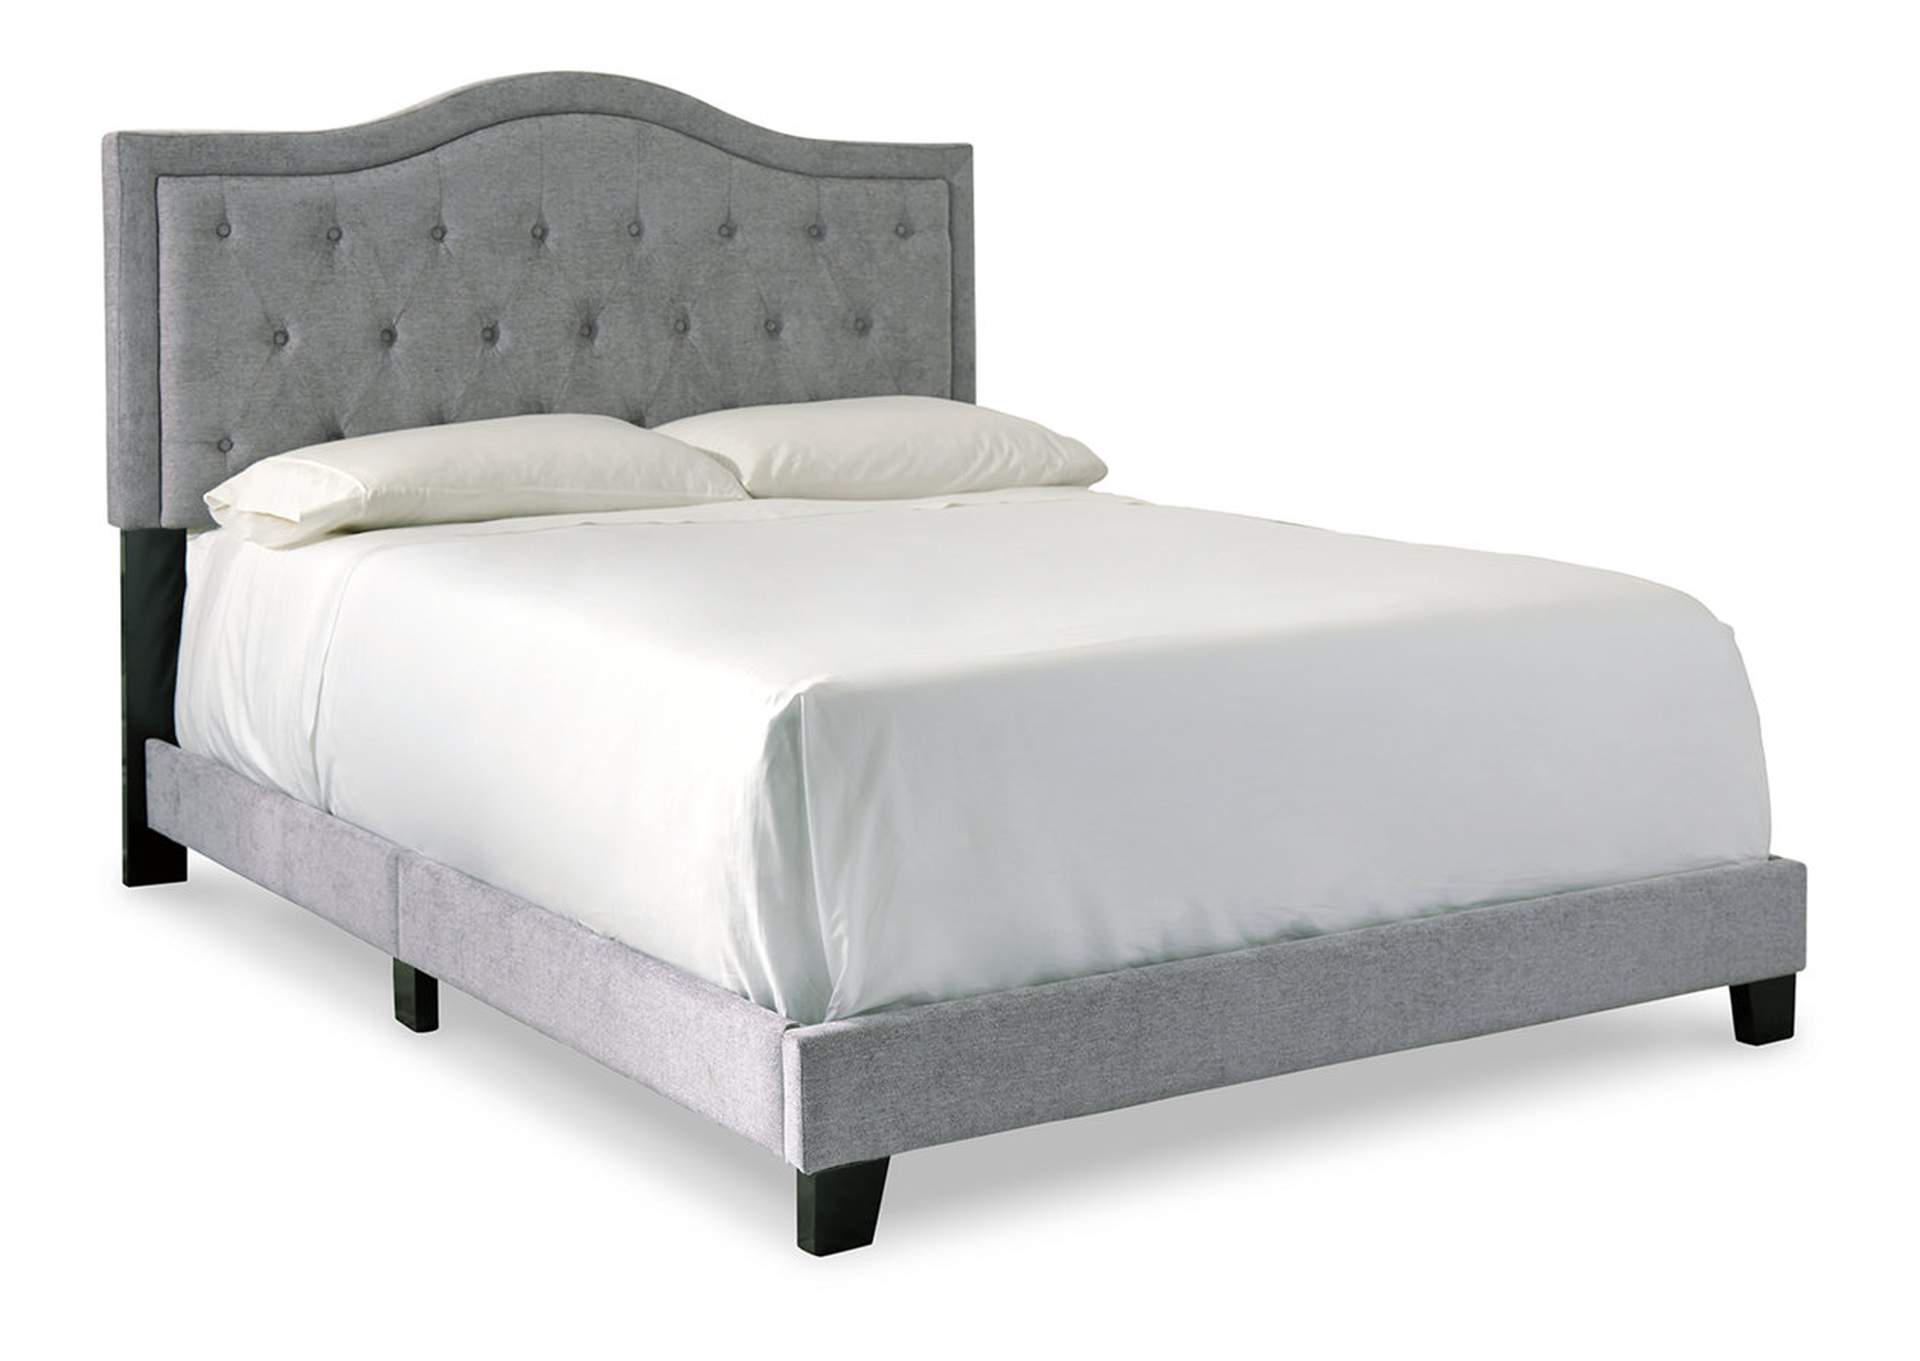 Jerary King Upholstered Bed